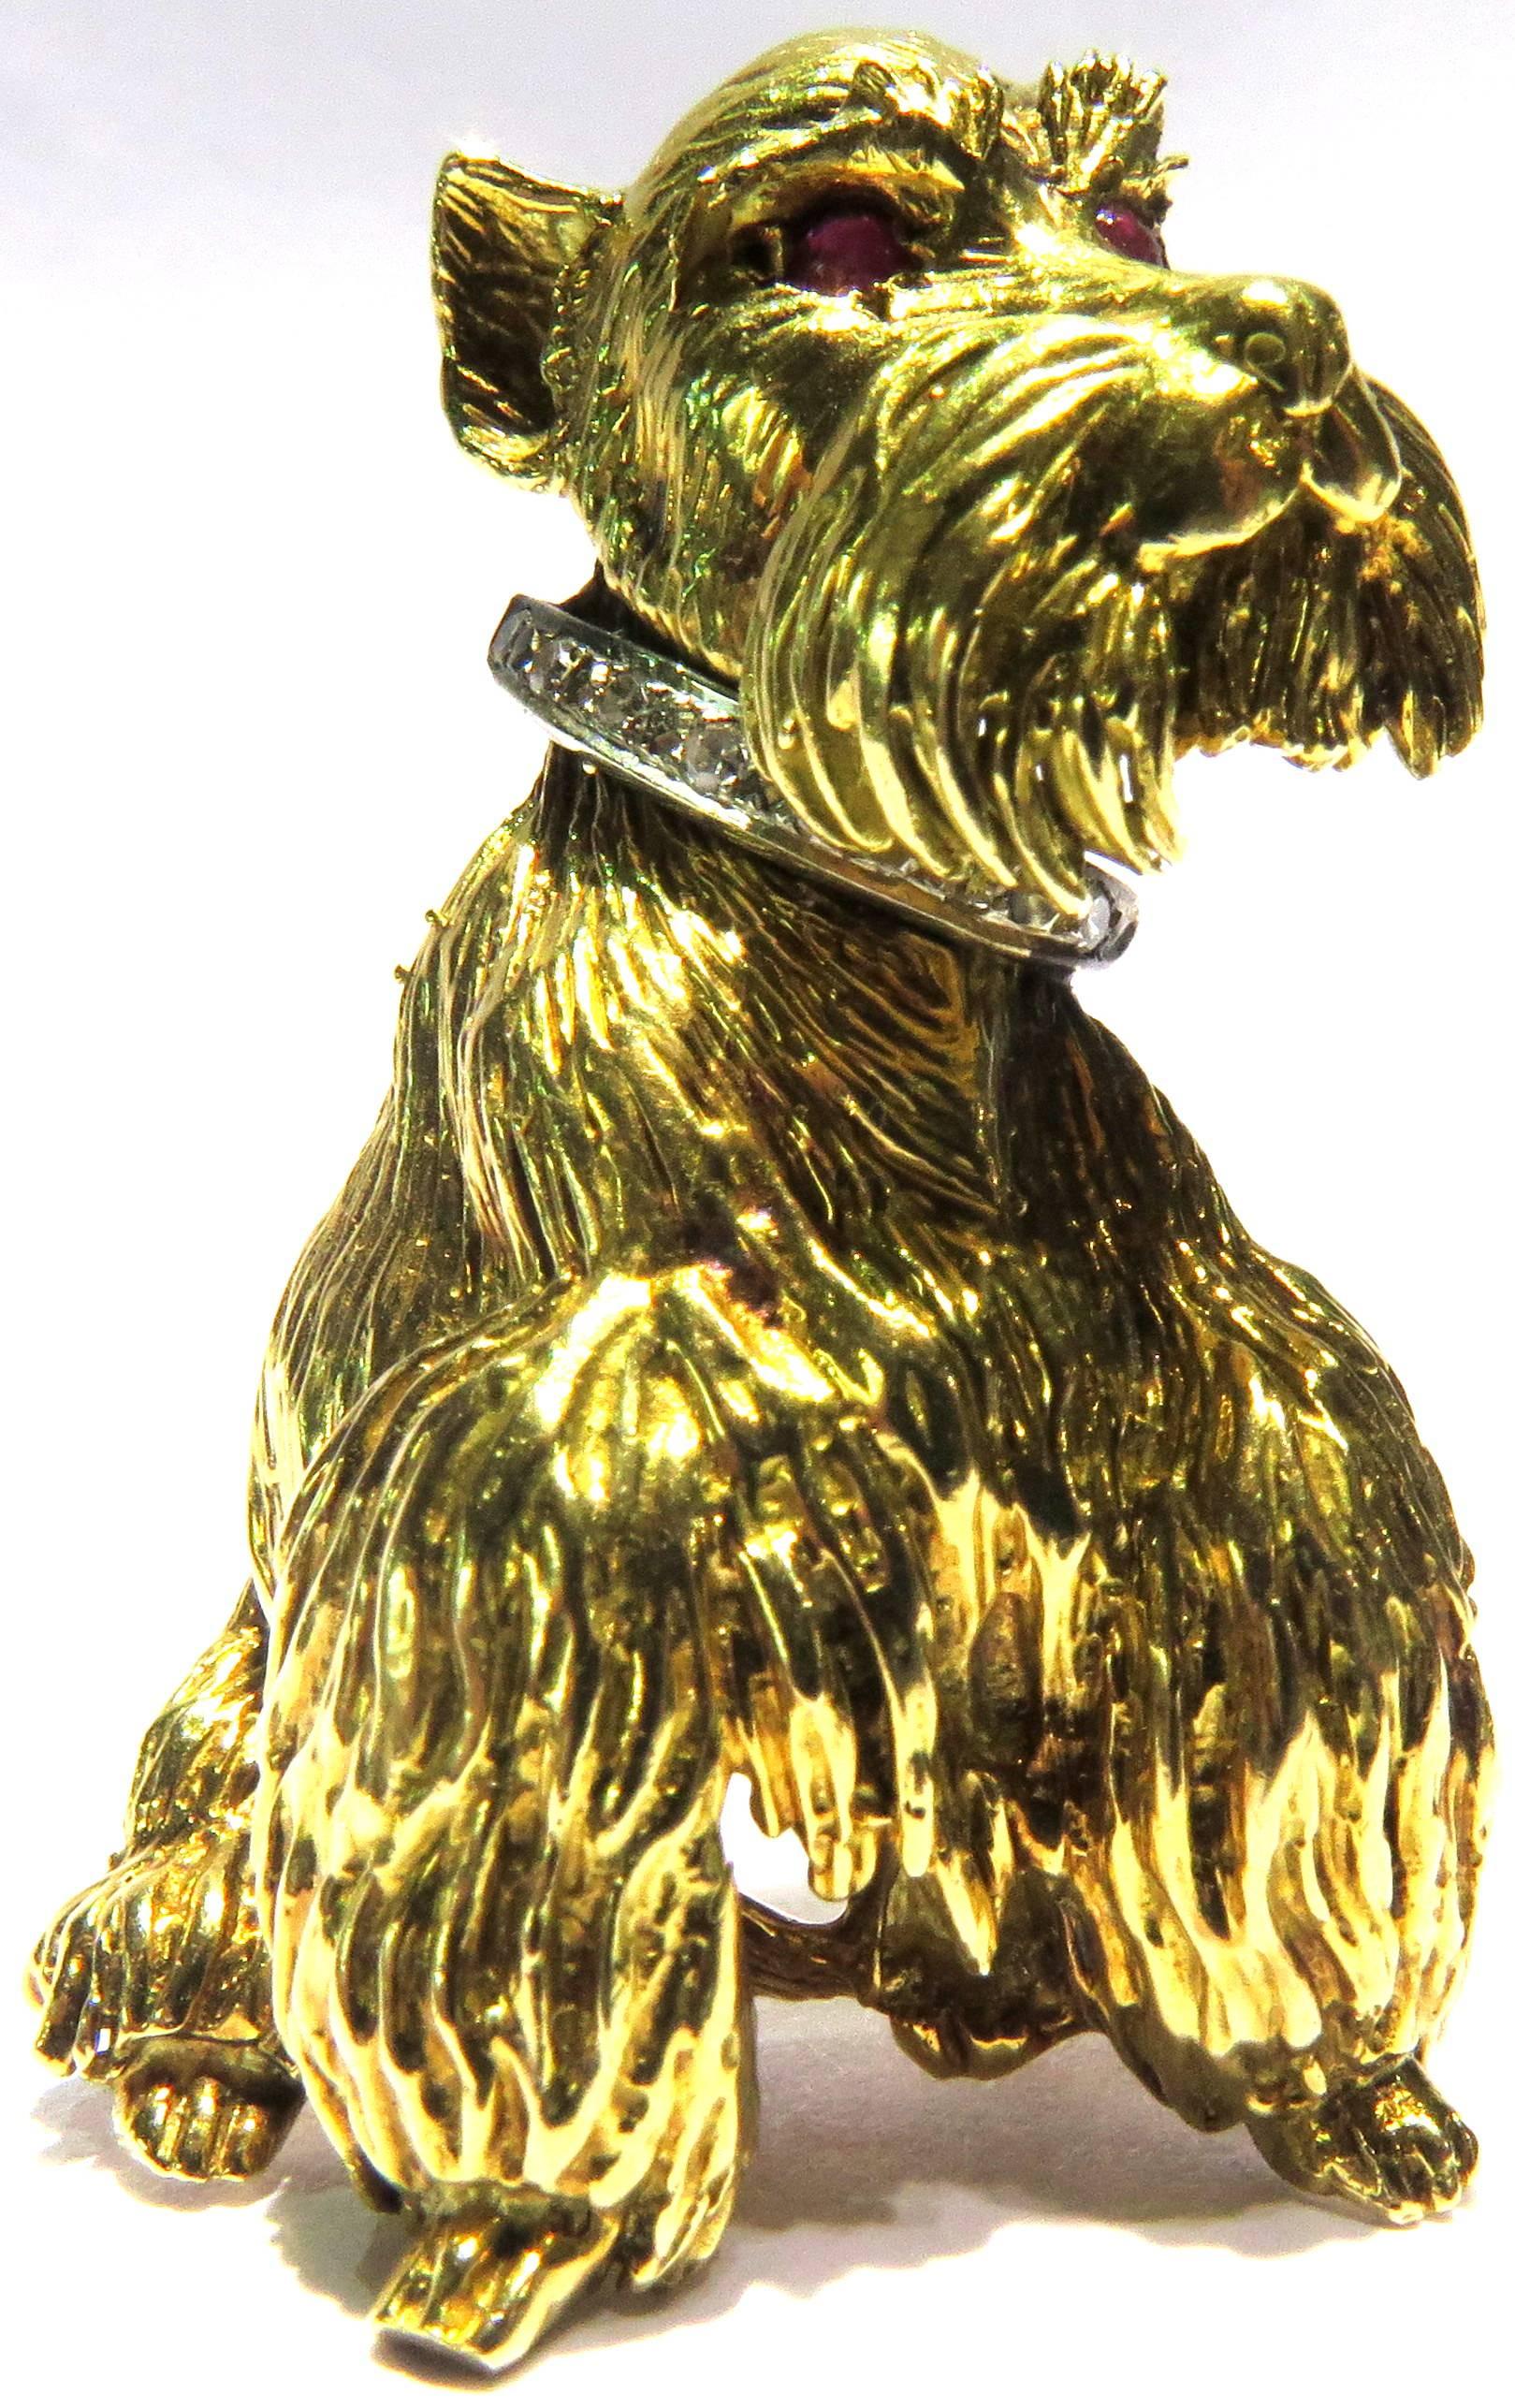 This adorable 18k gold dog pin is signed JK. His eyes are cabochon rubies and he wears a white gold diamond collar around that oh so handsome neck. 
This pin measures 1 3/4 inch high by 1 inch across
This pin weighs 18 grams